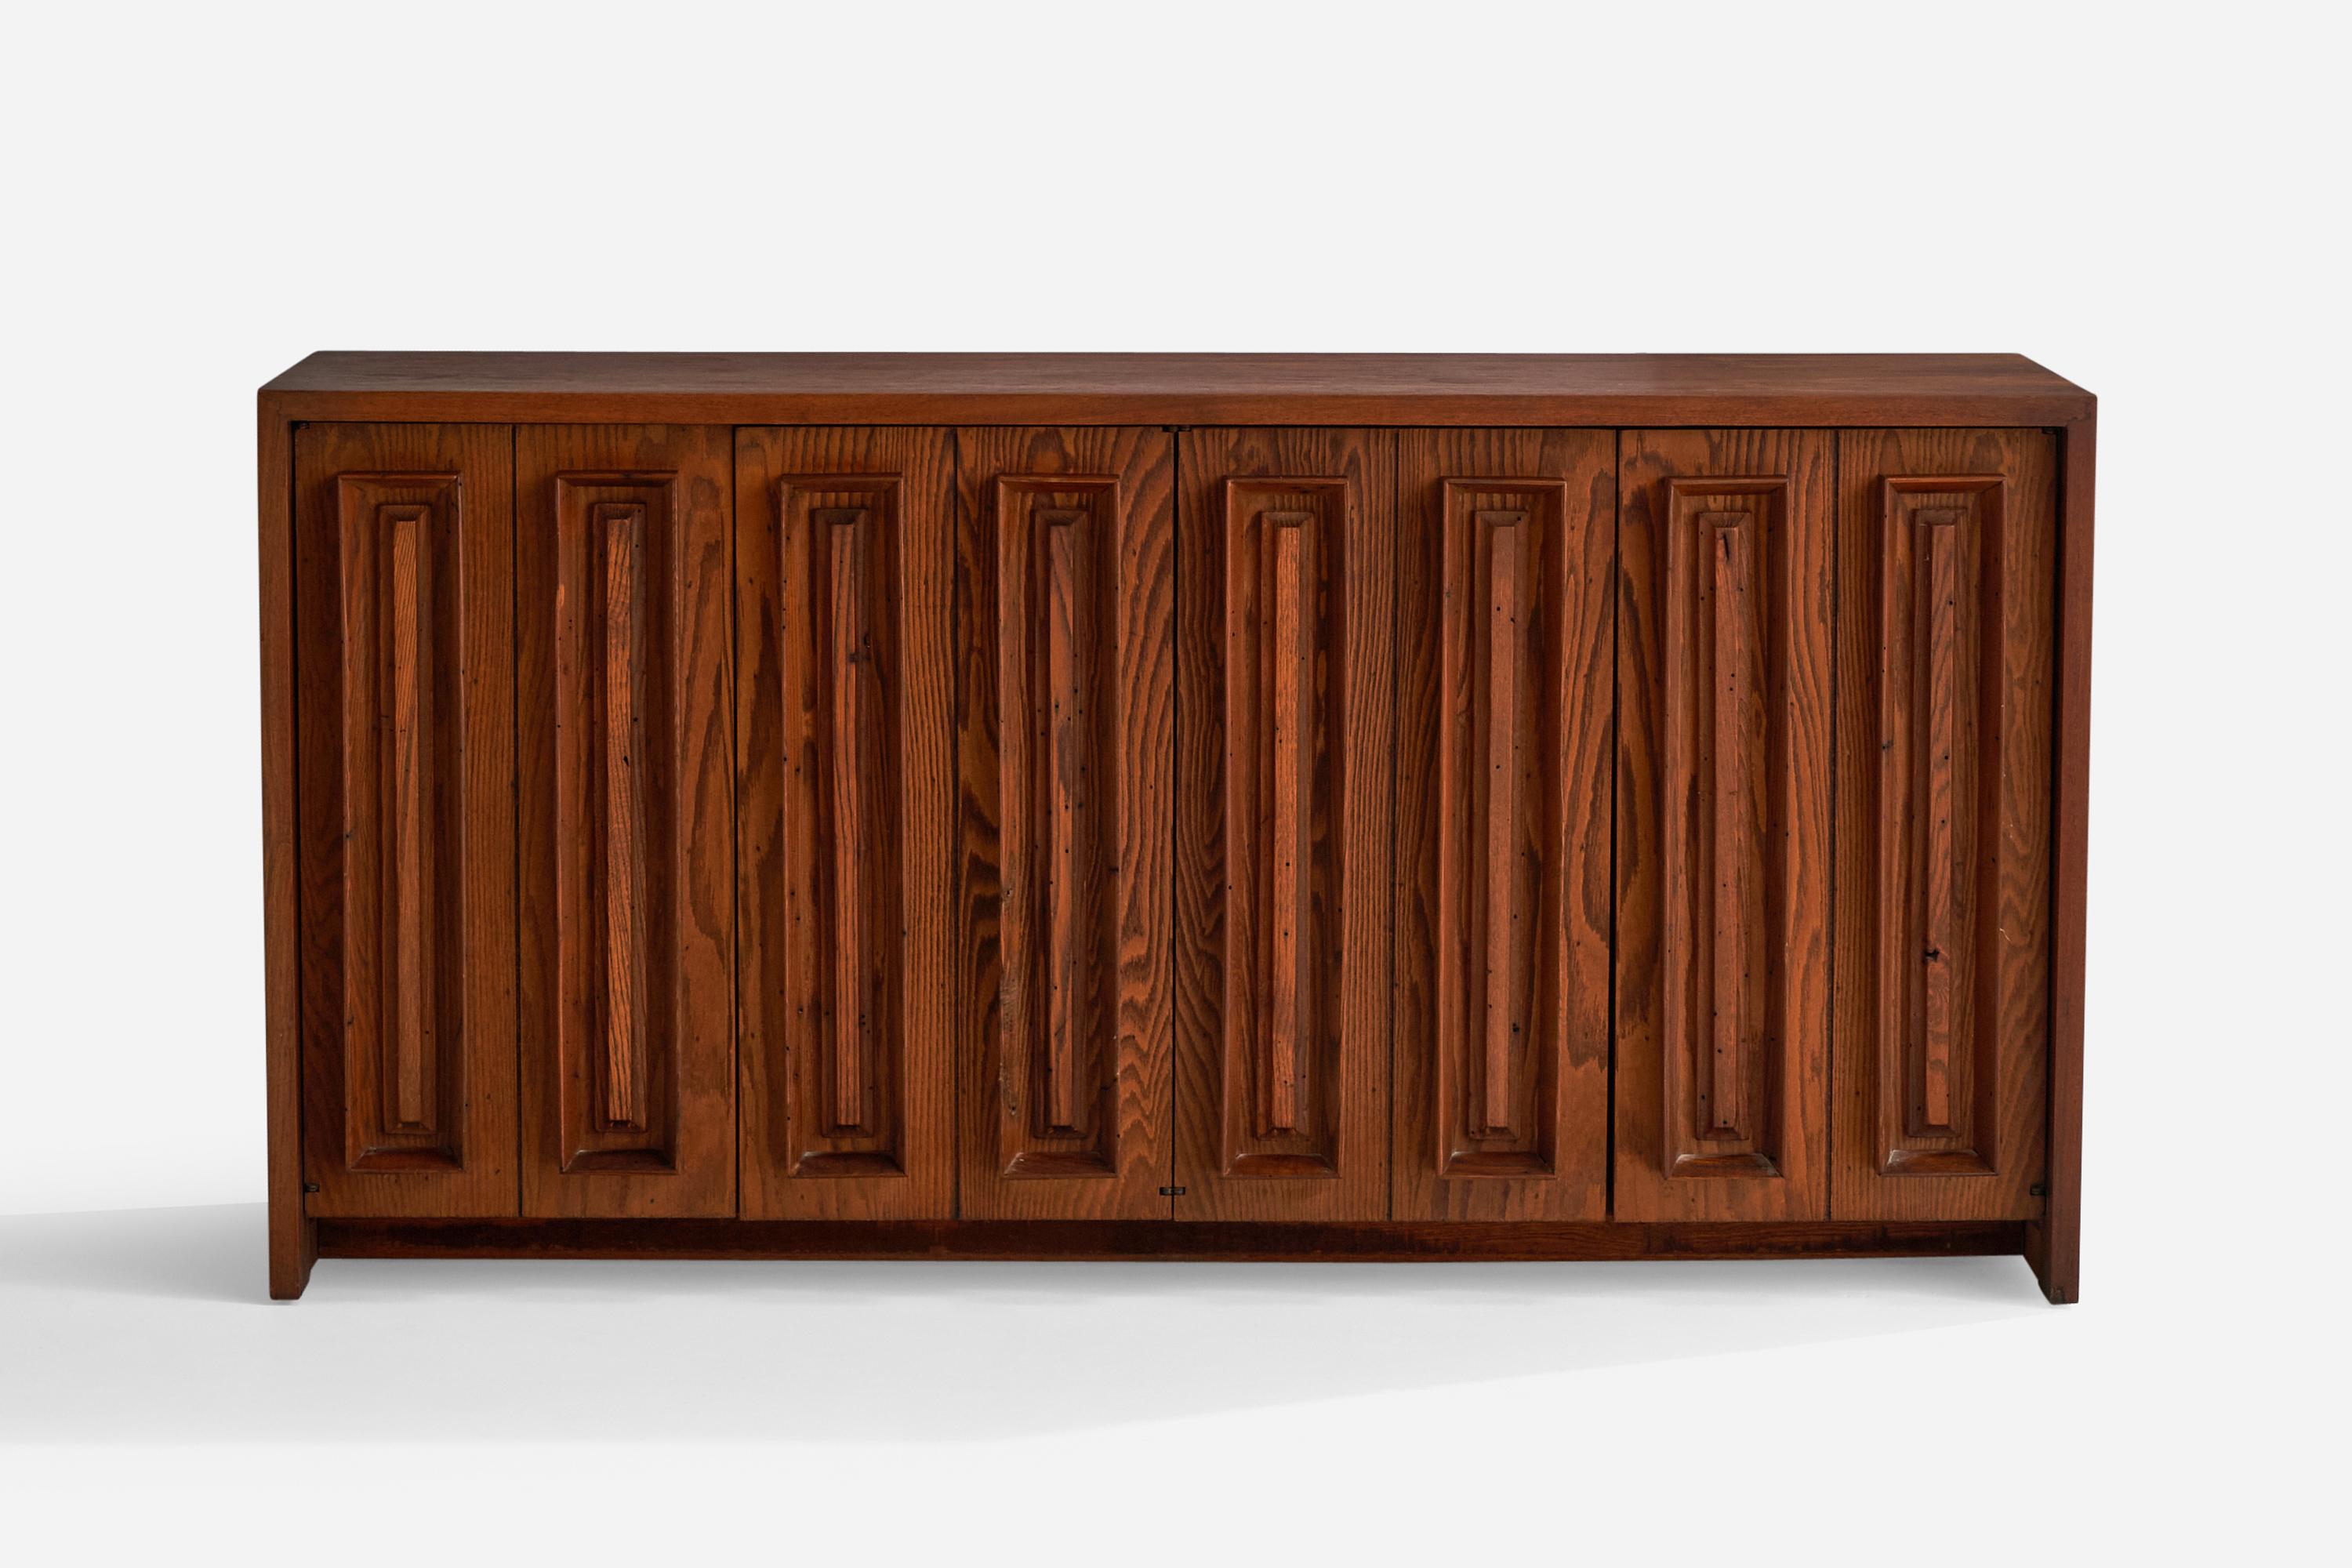 A stained pine and walnut cabinet designed and produced in the US, 1950s.